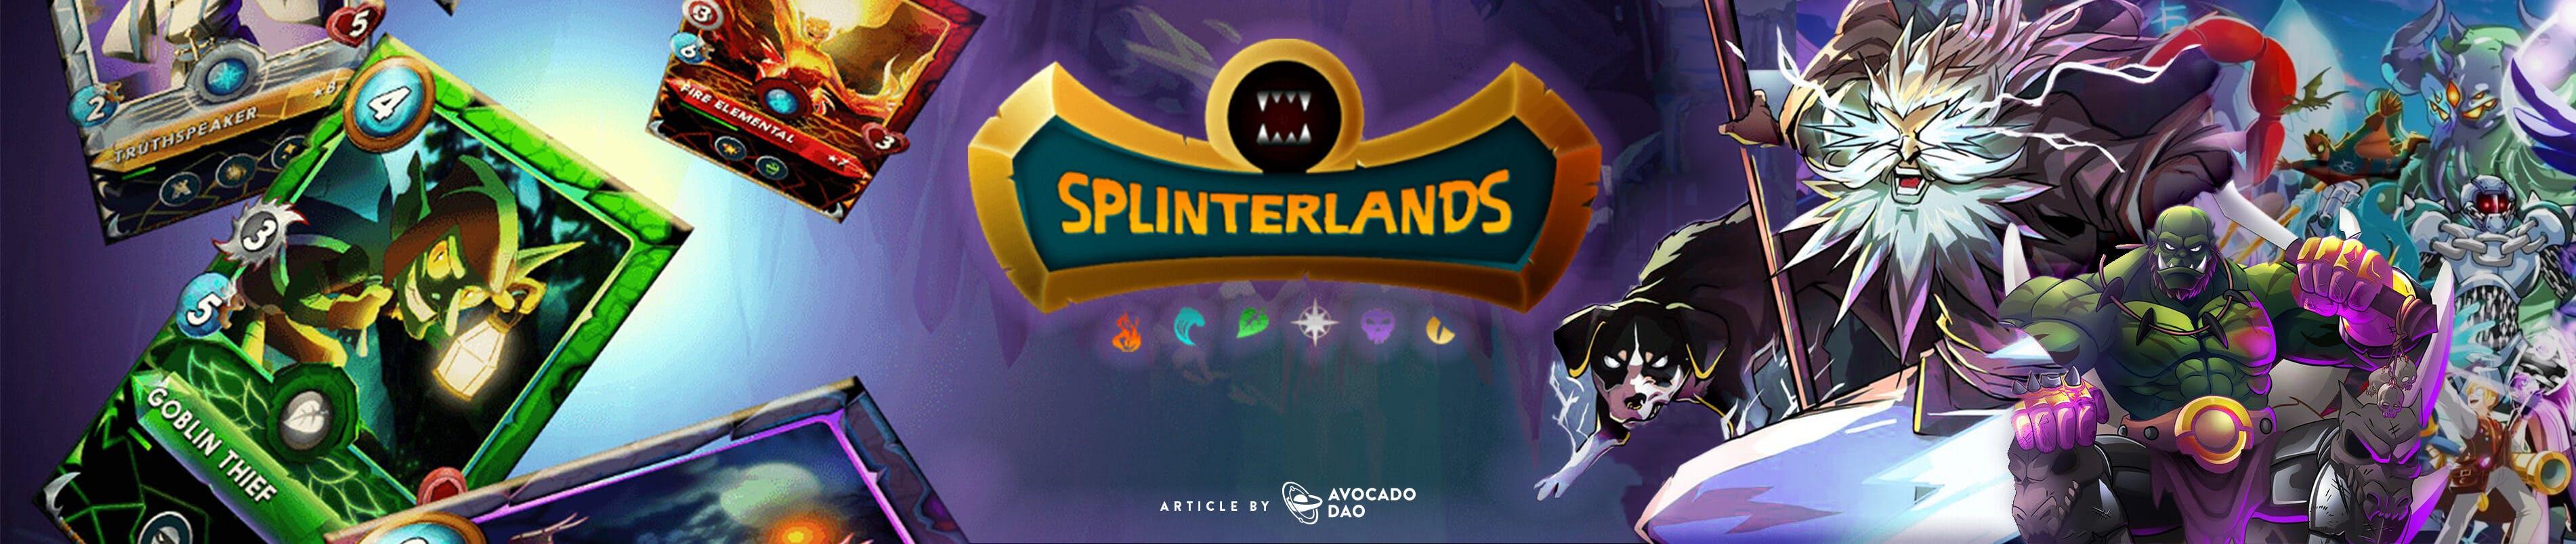 So how are you doing in splinterland's Leaderboard?